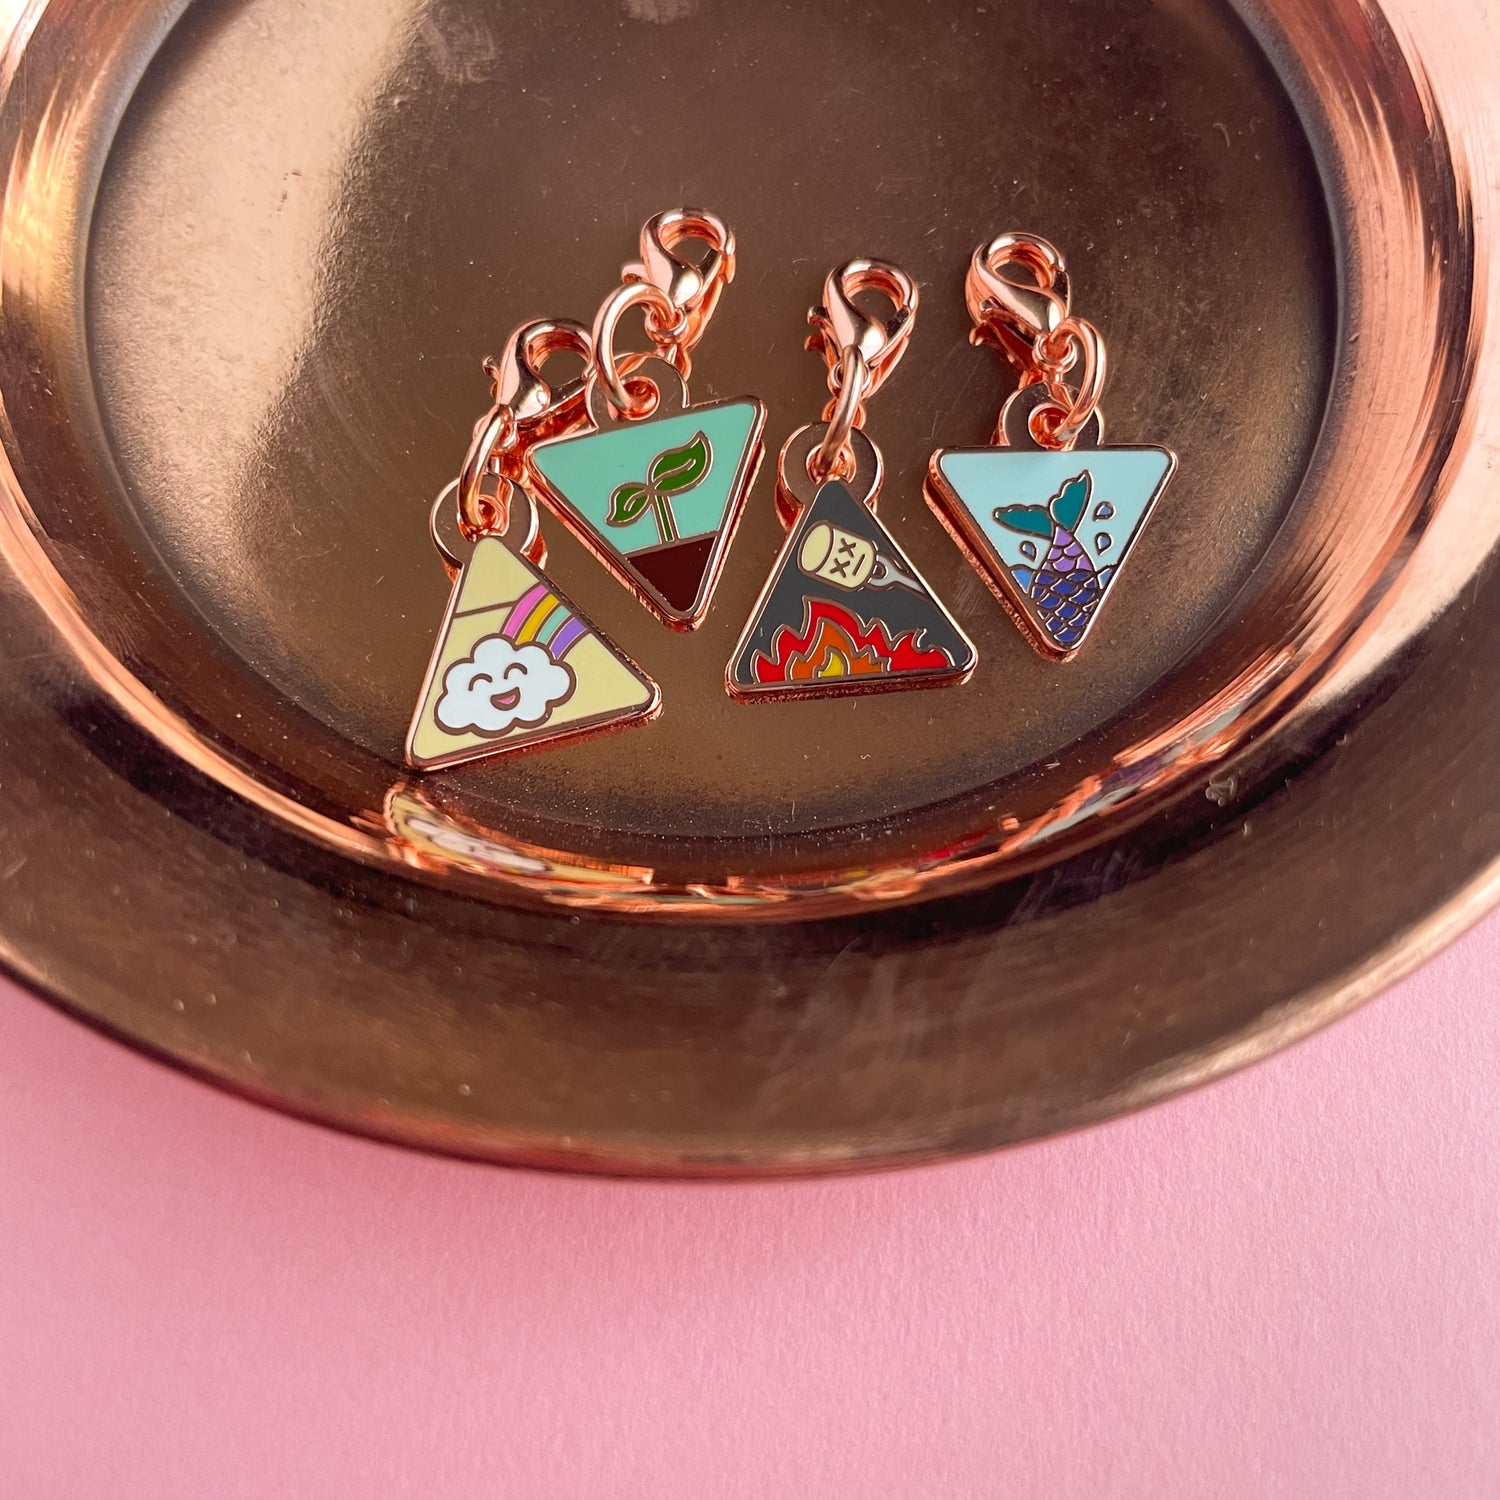 Four triangle shaped charms with lobster claw clasps. There is a mermaid tail charm, a fire with a marshmallow charm, a plant sprouting charm, and a happy rainbow cloud charm.  The charms are on a copper plate on top of a pink background.